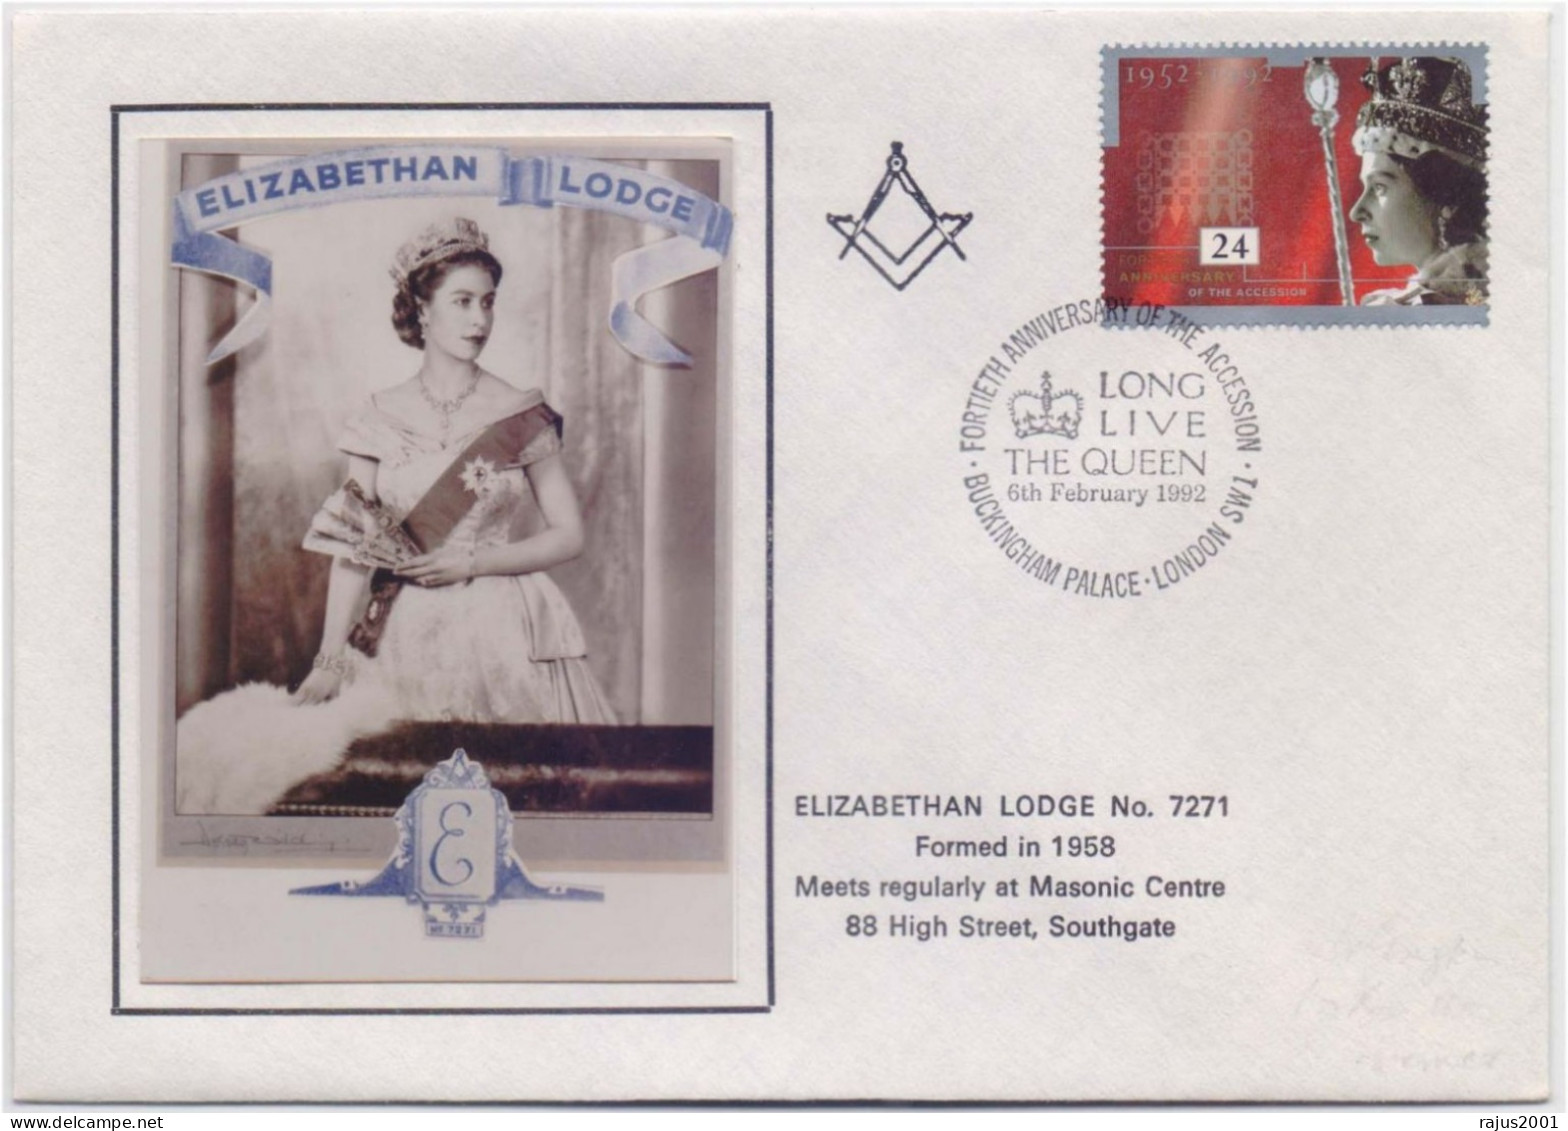 ELIZABETHAN LODGE NO 7271 FORMED IN 1958, Queen Elizabeth, Freemasonry, Masonic Limited Only 100 Cover Issued Cover - Franc-Maçonnerie